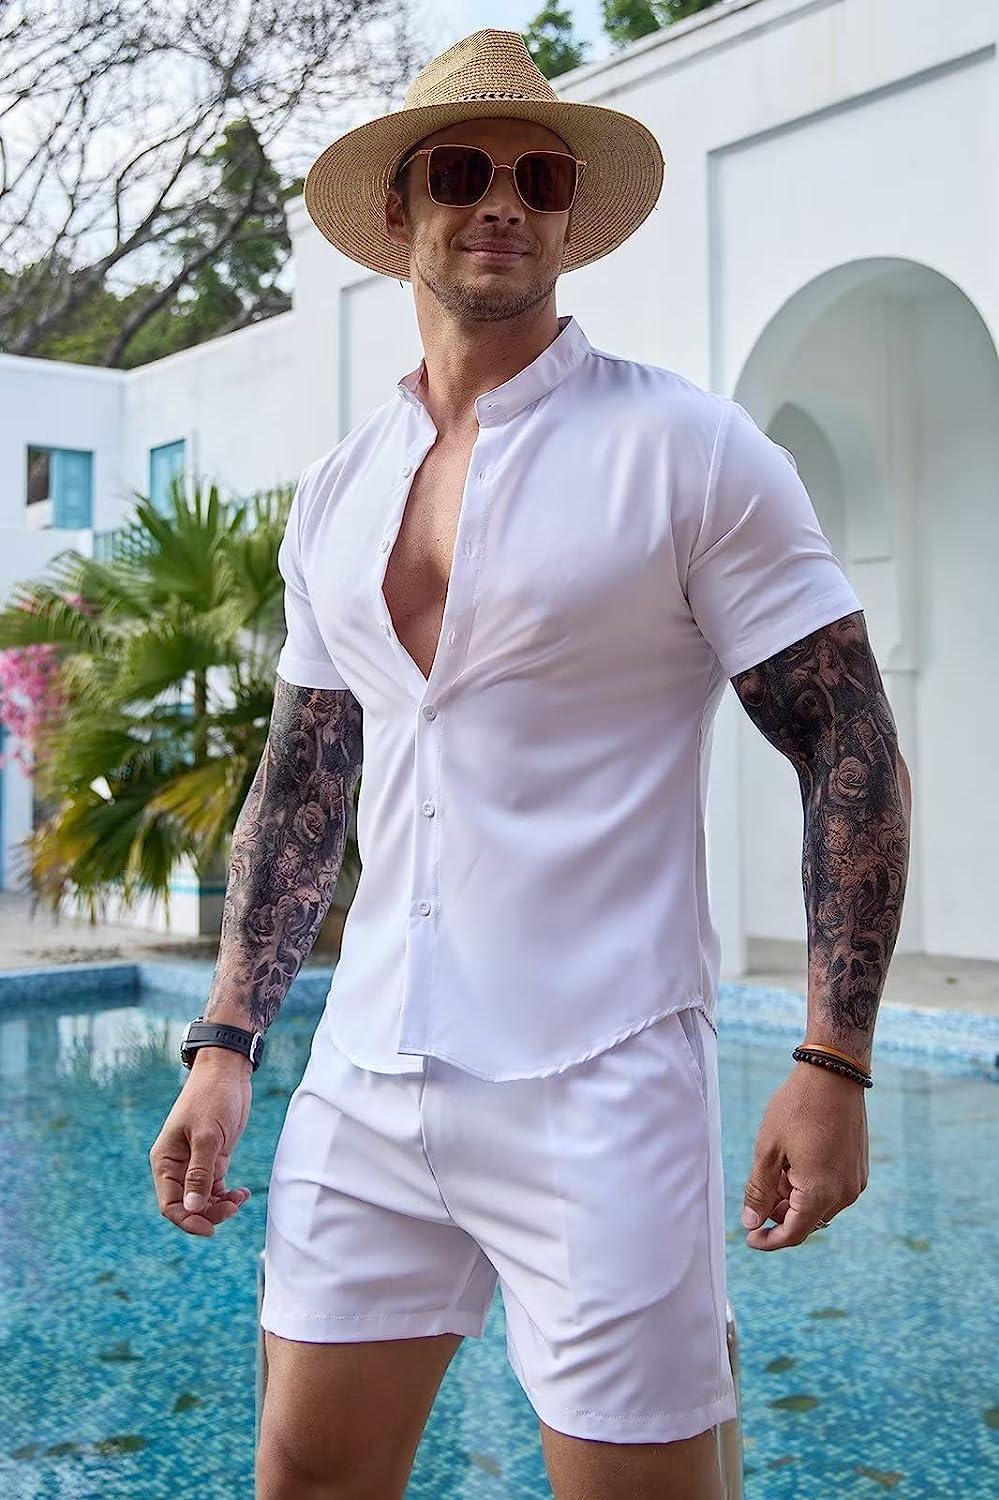 Summer Mens Outfit 2-Piece Set Short Sleeve Shirts and Shorts Sweatsuit Set  Hot